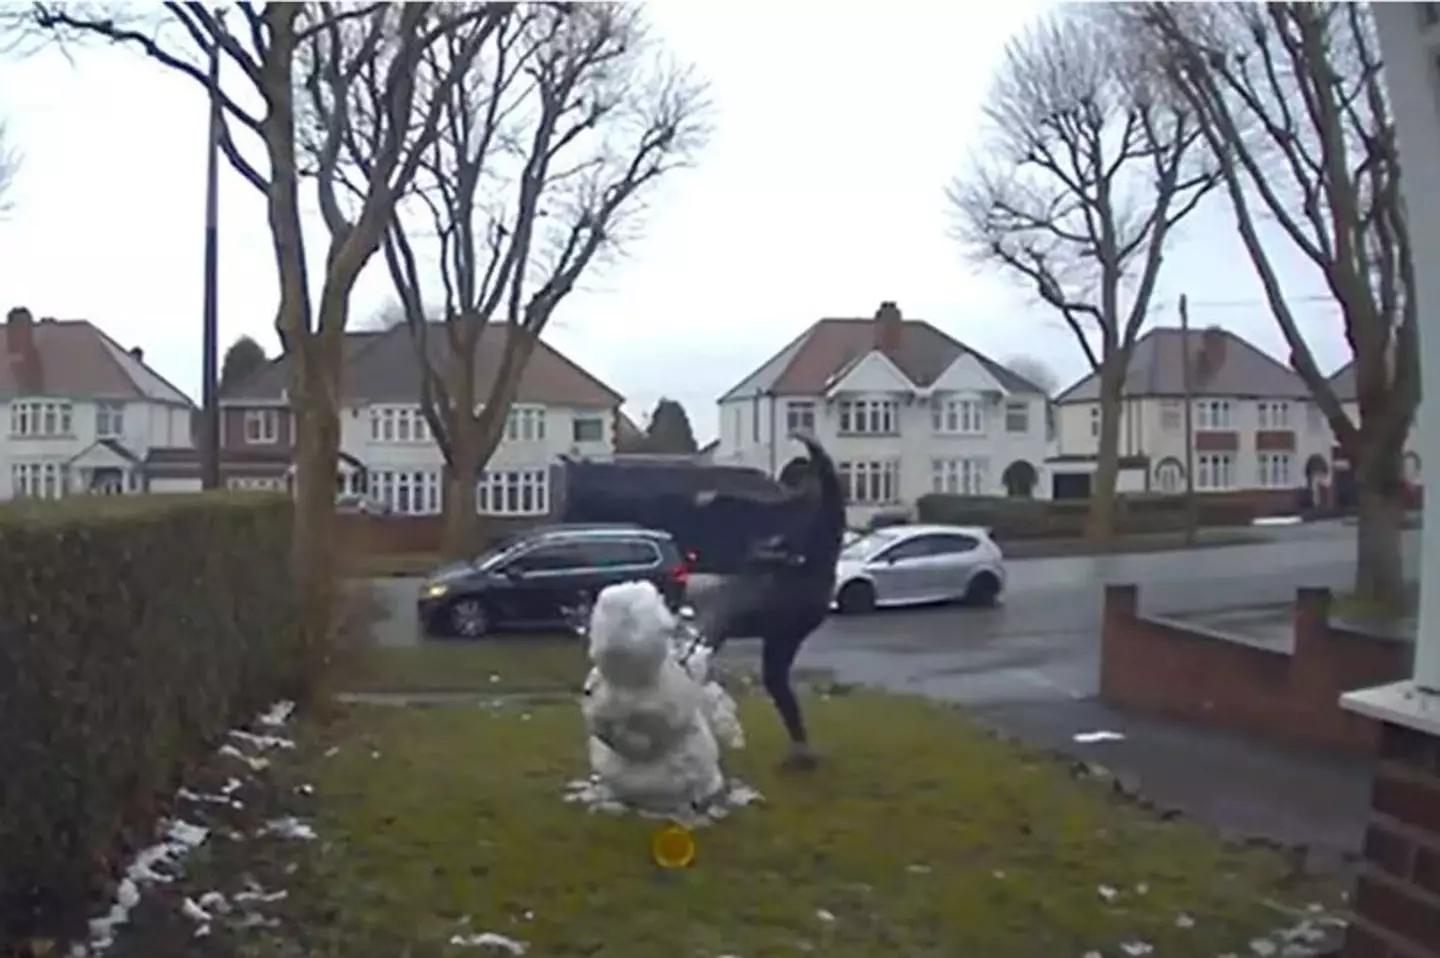 The innocent snowman didn't stand a chance.